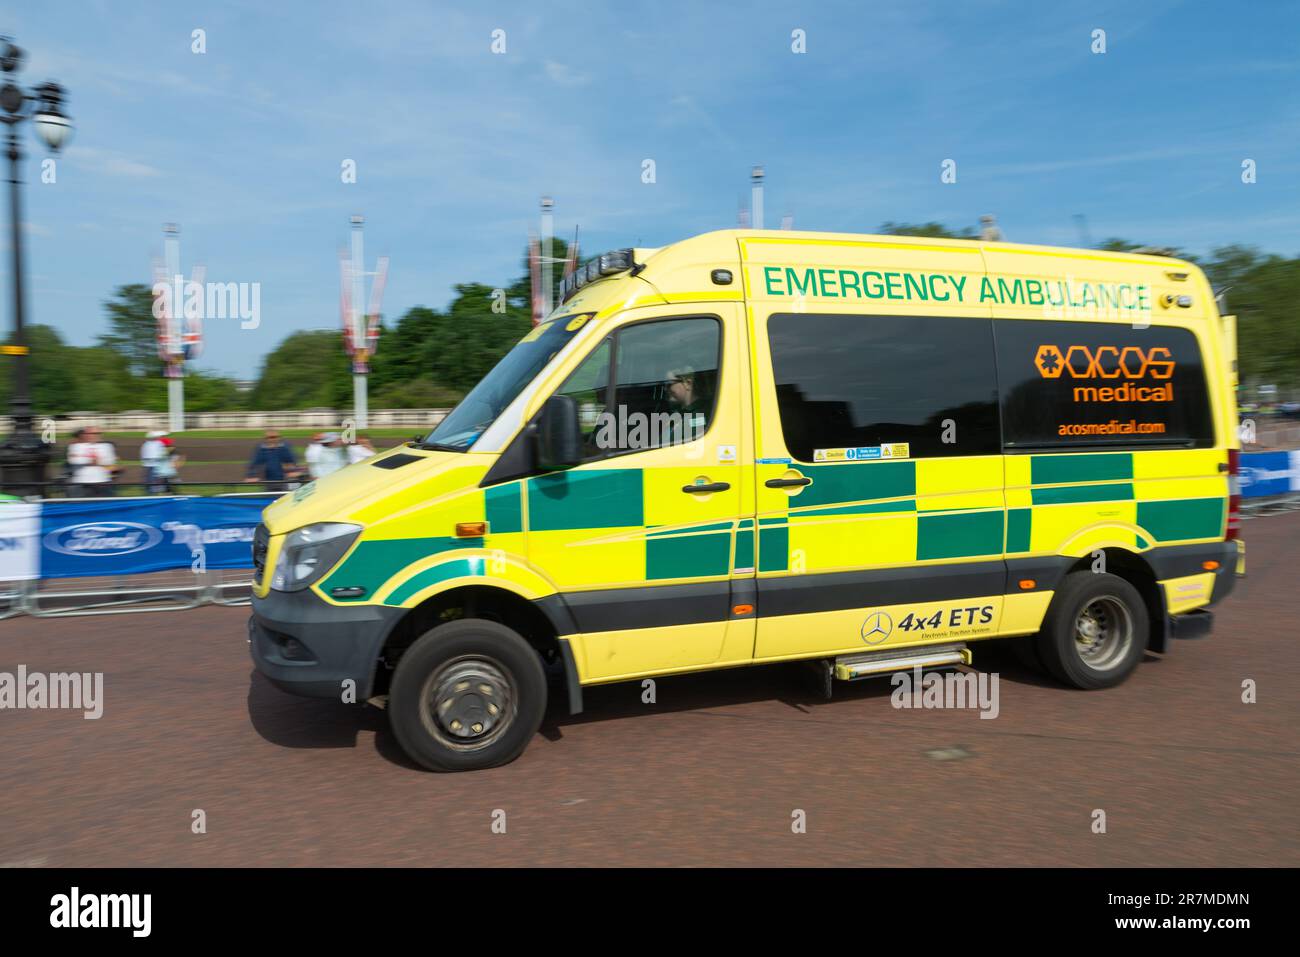 ACOS Medical Ltd Emergency ambulance medical support for the RideLondon UCI Women's WorldTour Classique cycle race in London, UK Stock Photo